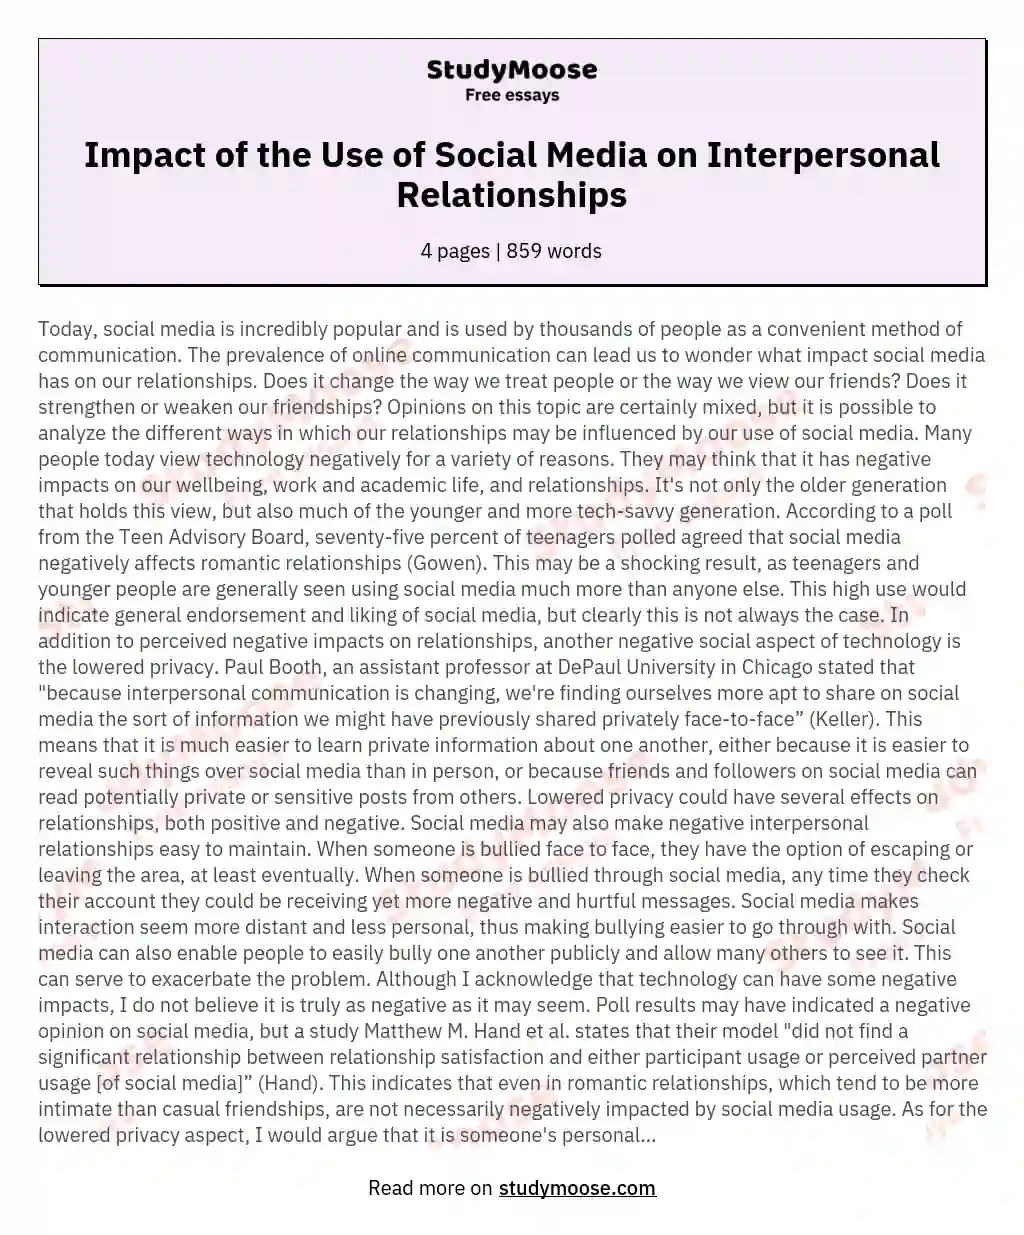 Impact of the Use of Social Media on Interpersonal Relationships essay